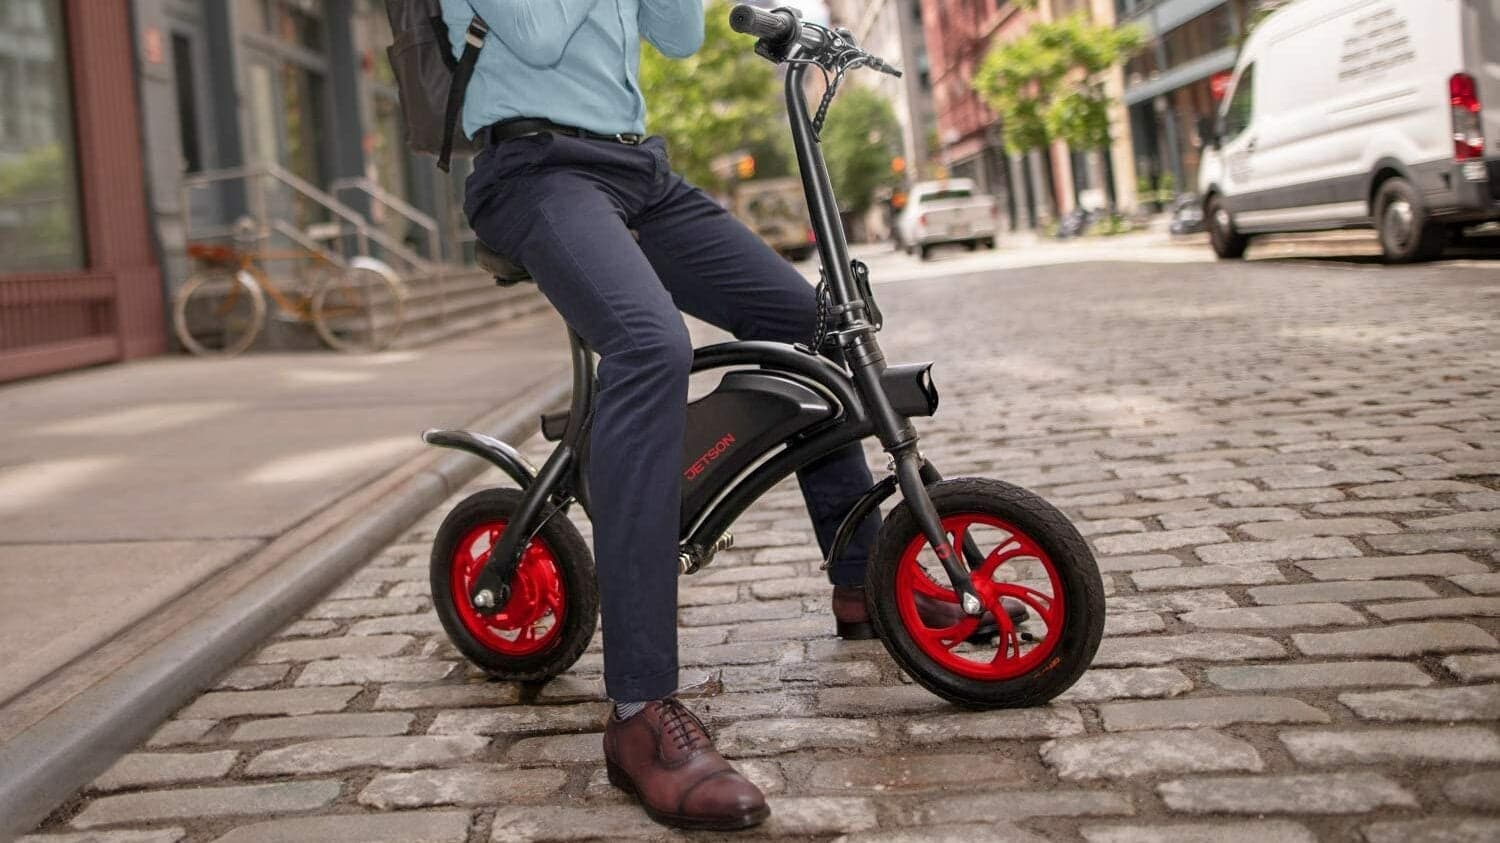 The Best Folding Electric Bikes (Review & Buying Guide) in 2022